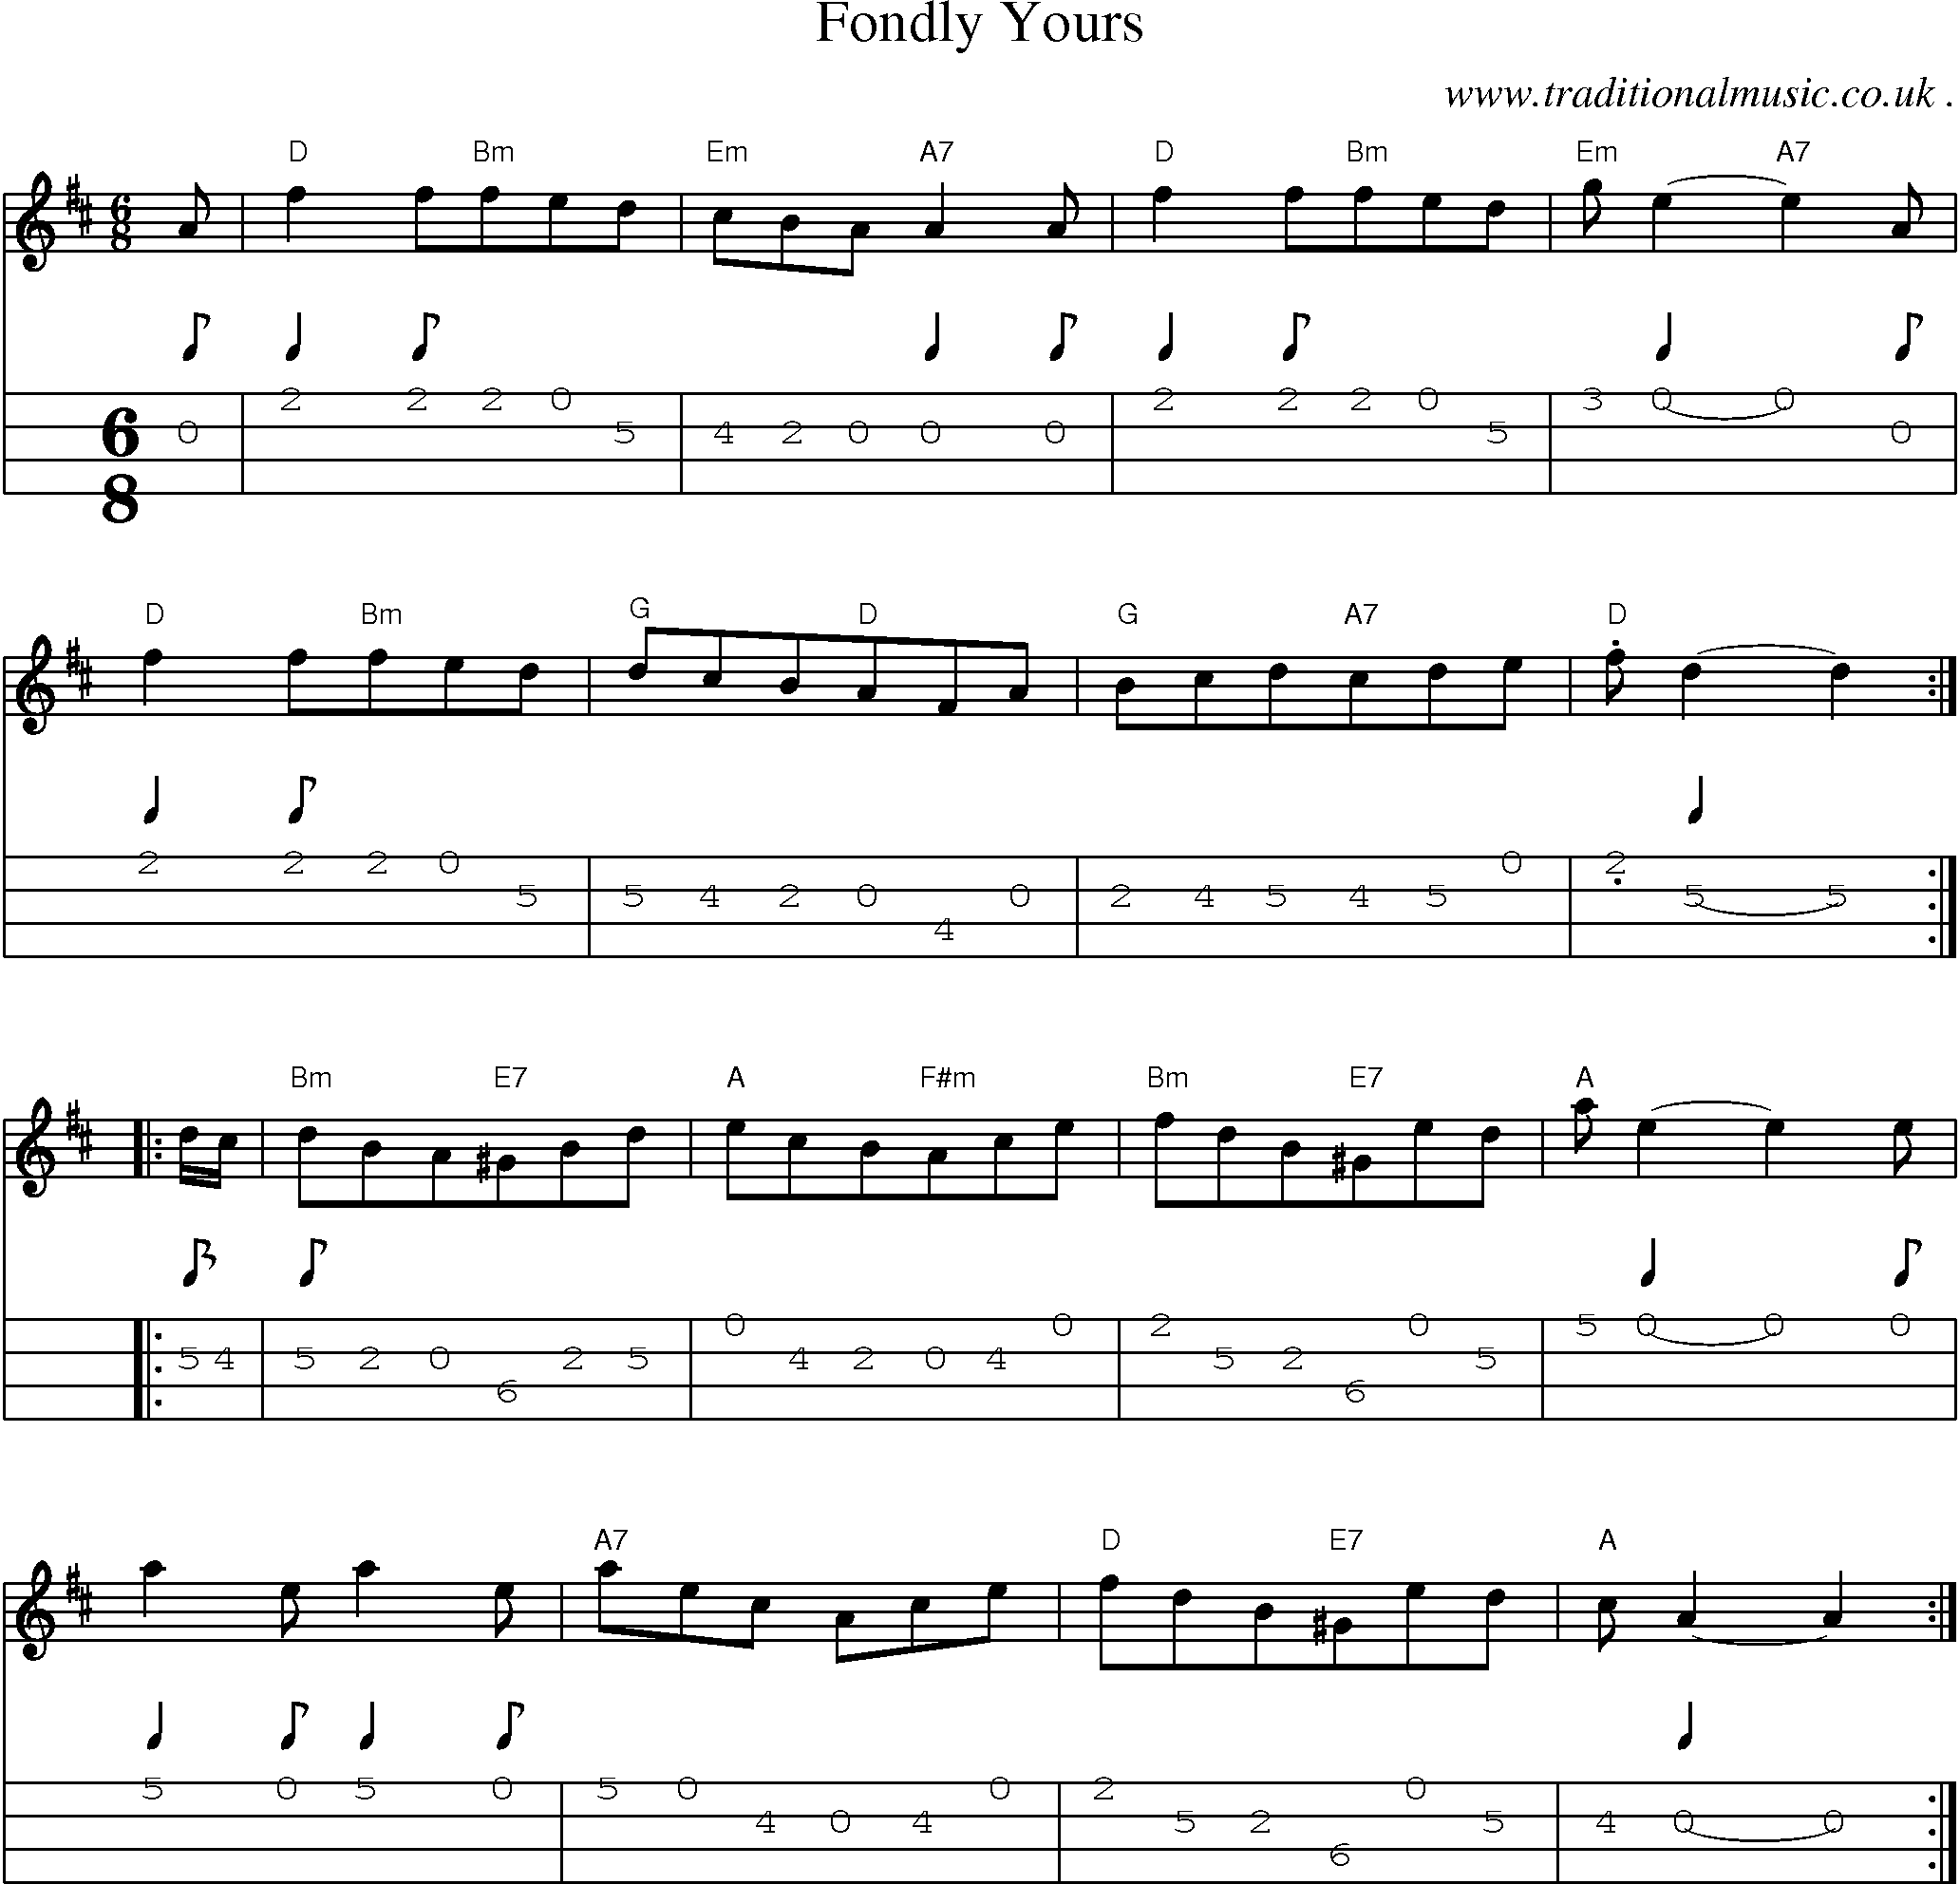 Sheet-Music and Mandolin Tabs for Fondly Yours